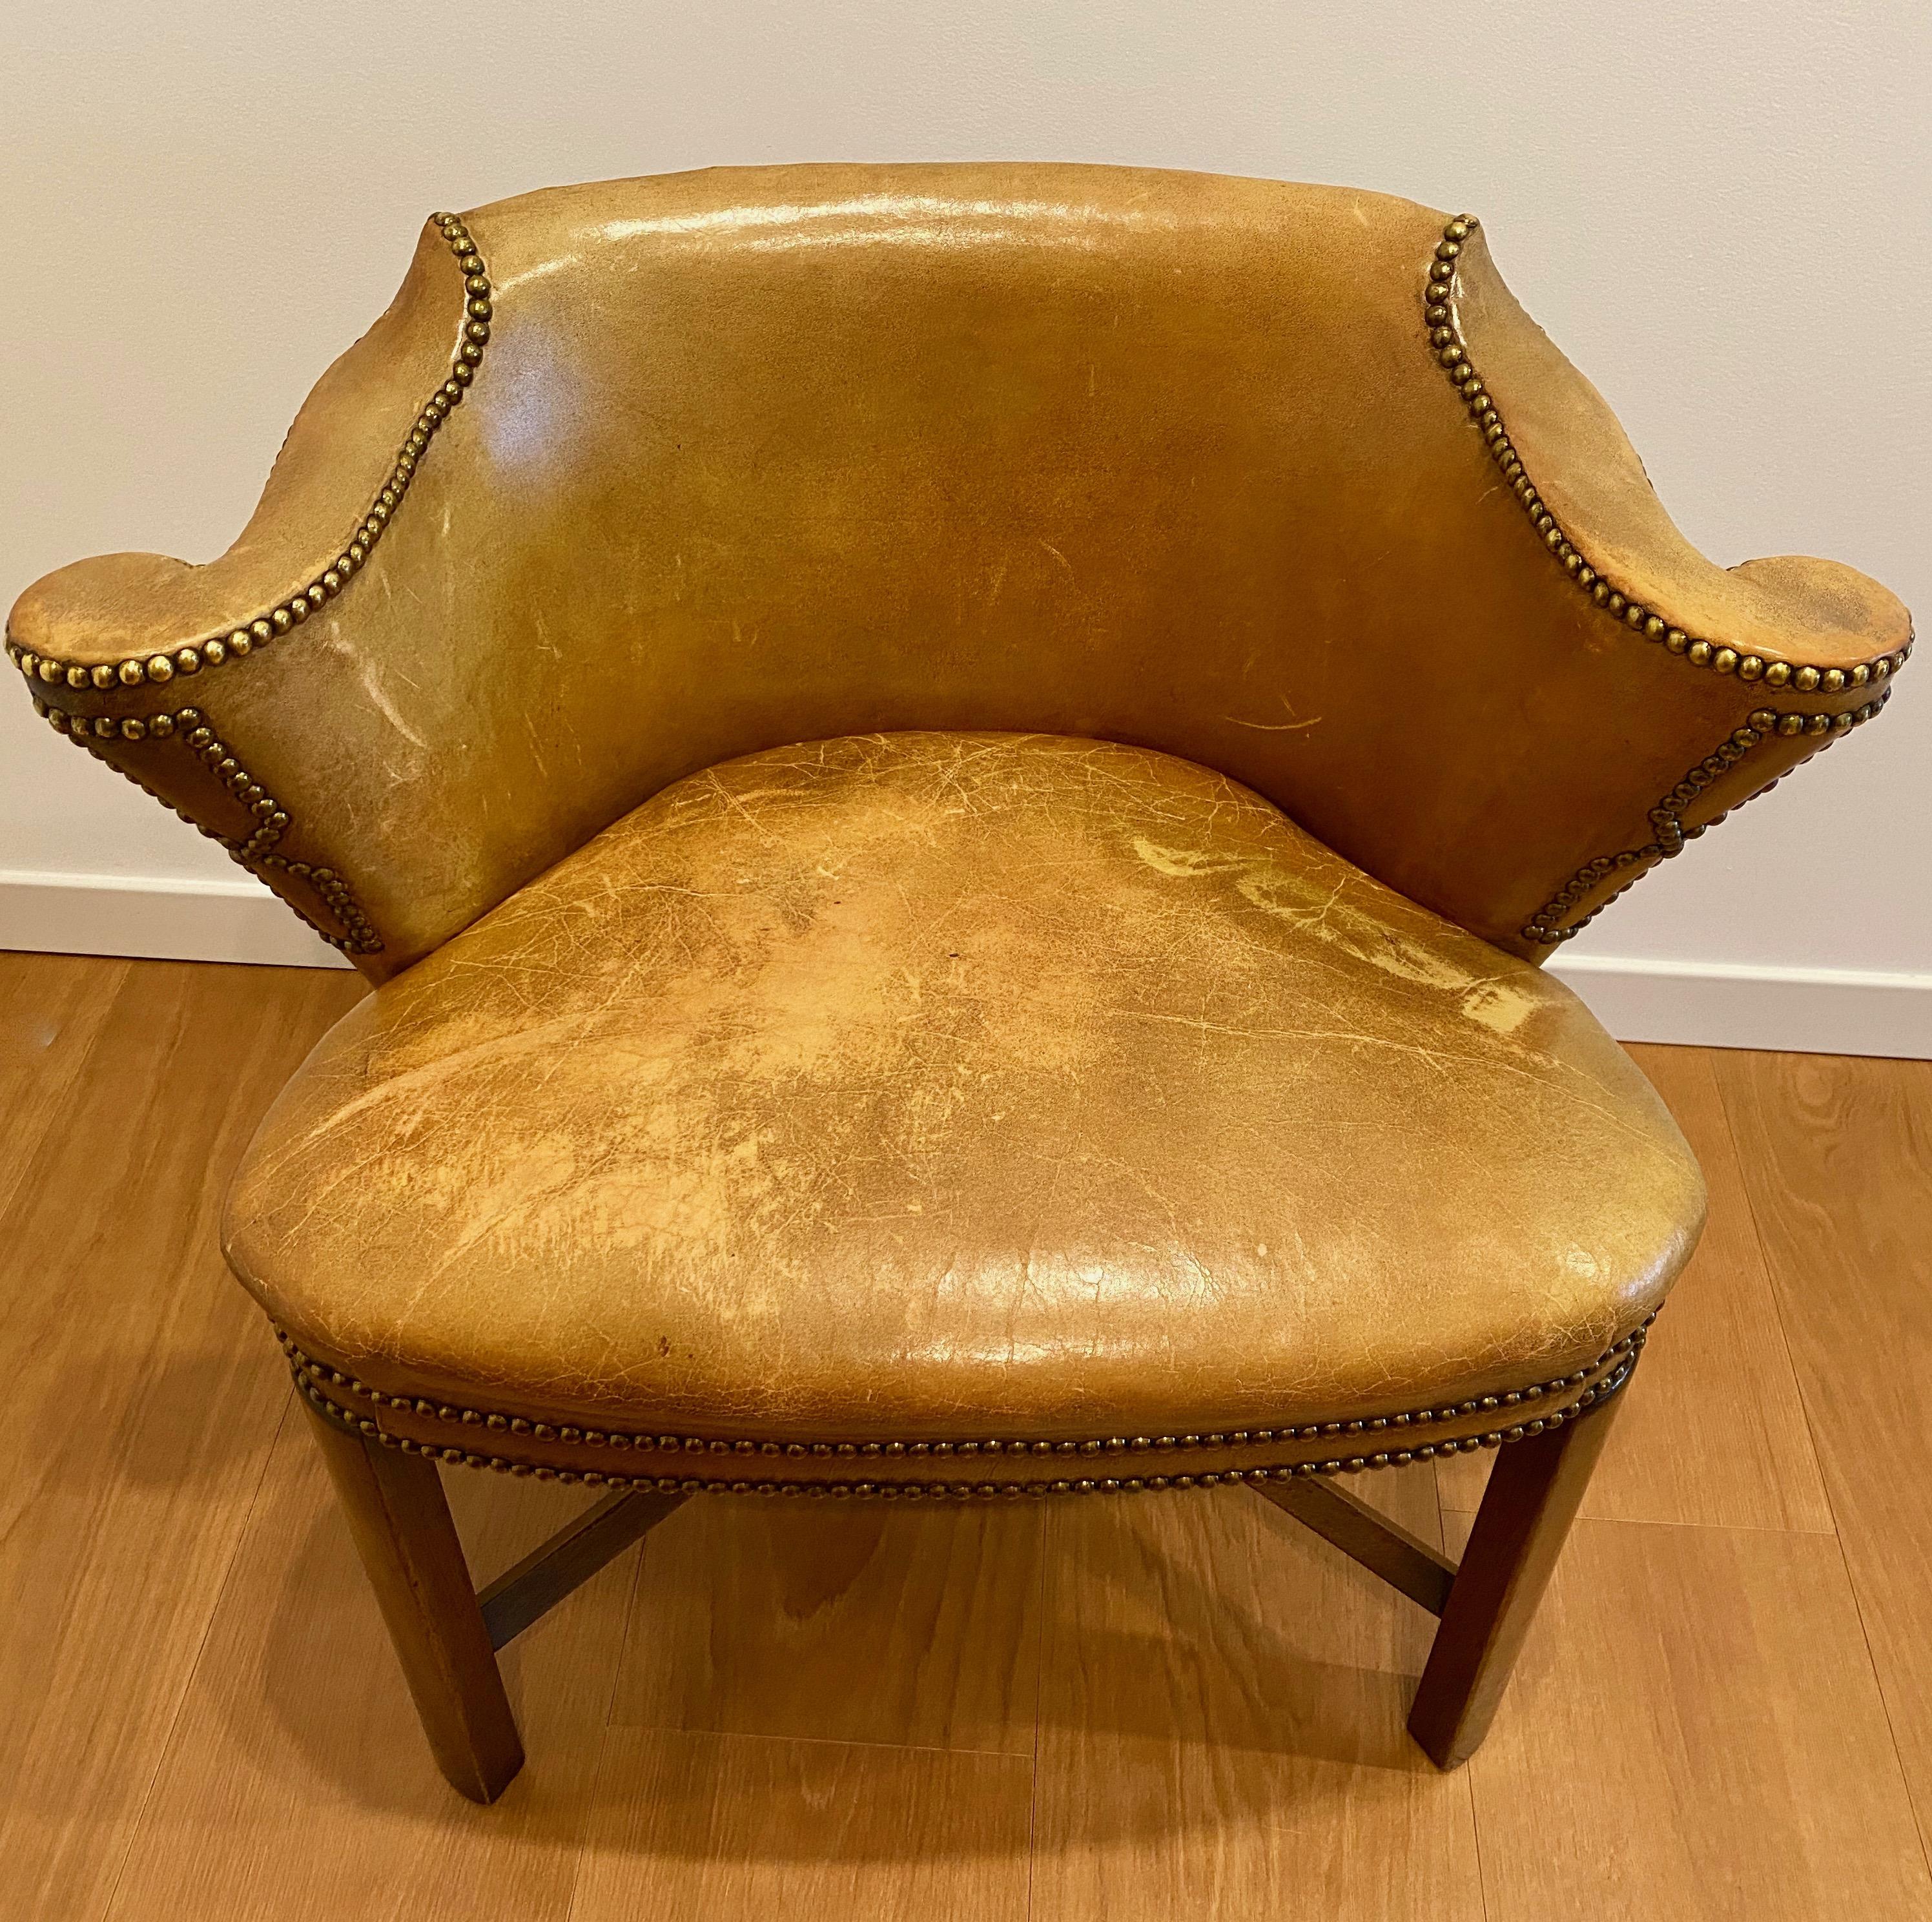 Edwardian Oak and Leather Library Armchair, Ca. 1905

This unusual shape library armchair is English of the Edwardian period (1901-1910). It reassumes the new era that the furniture and all the visual arts took with the new King; from the austere